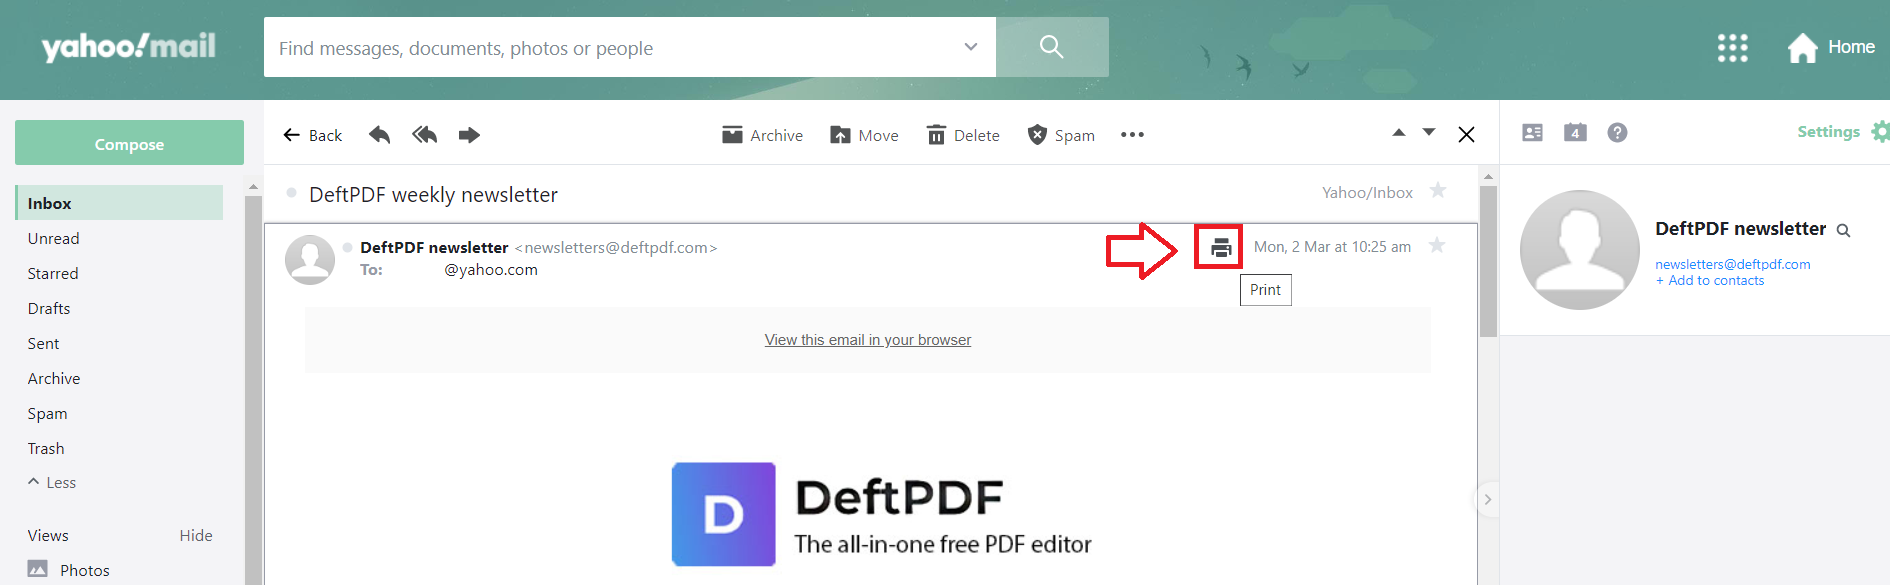 How to Print to PDF with Yahoo